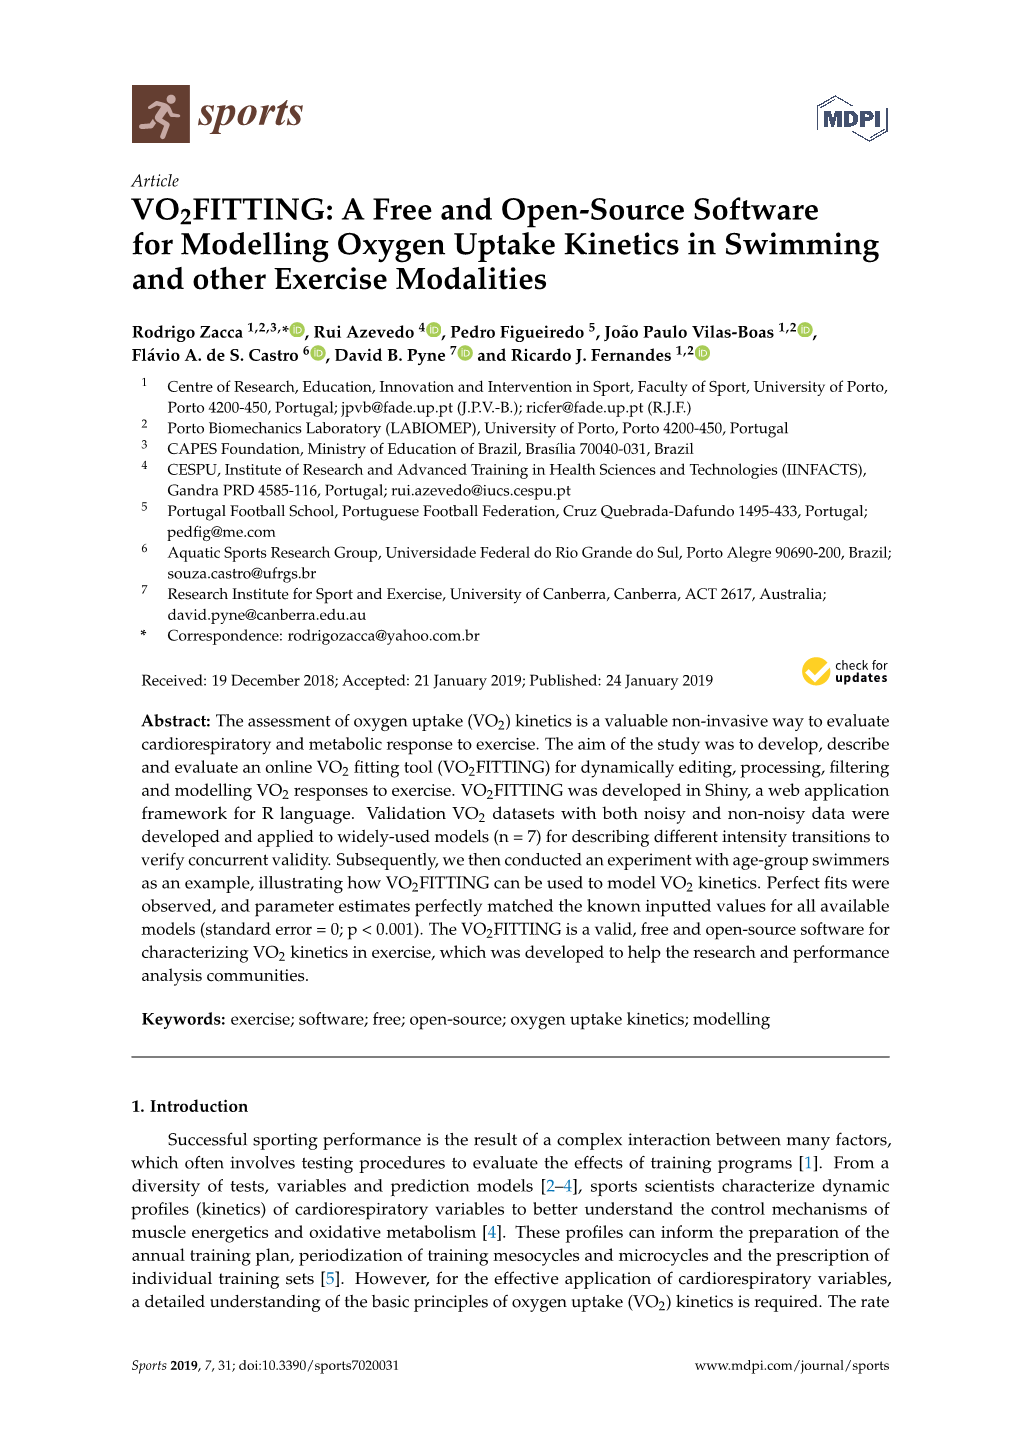 A Free and Open-Source Software for Modelling Oxygen Uptake Kinetics in Swimming and Other Exercise Modalities